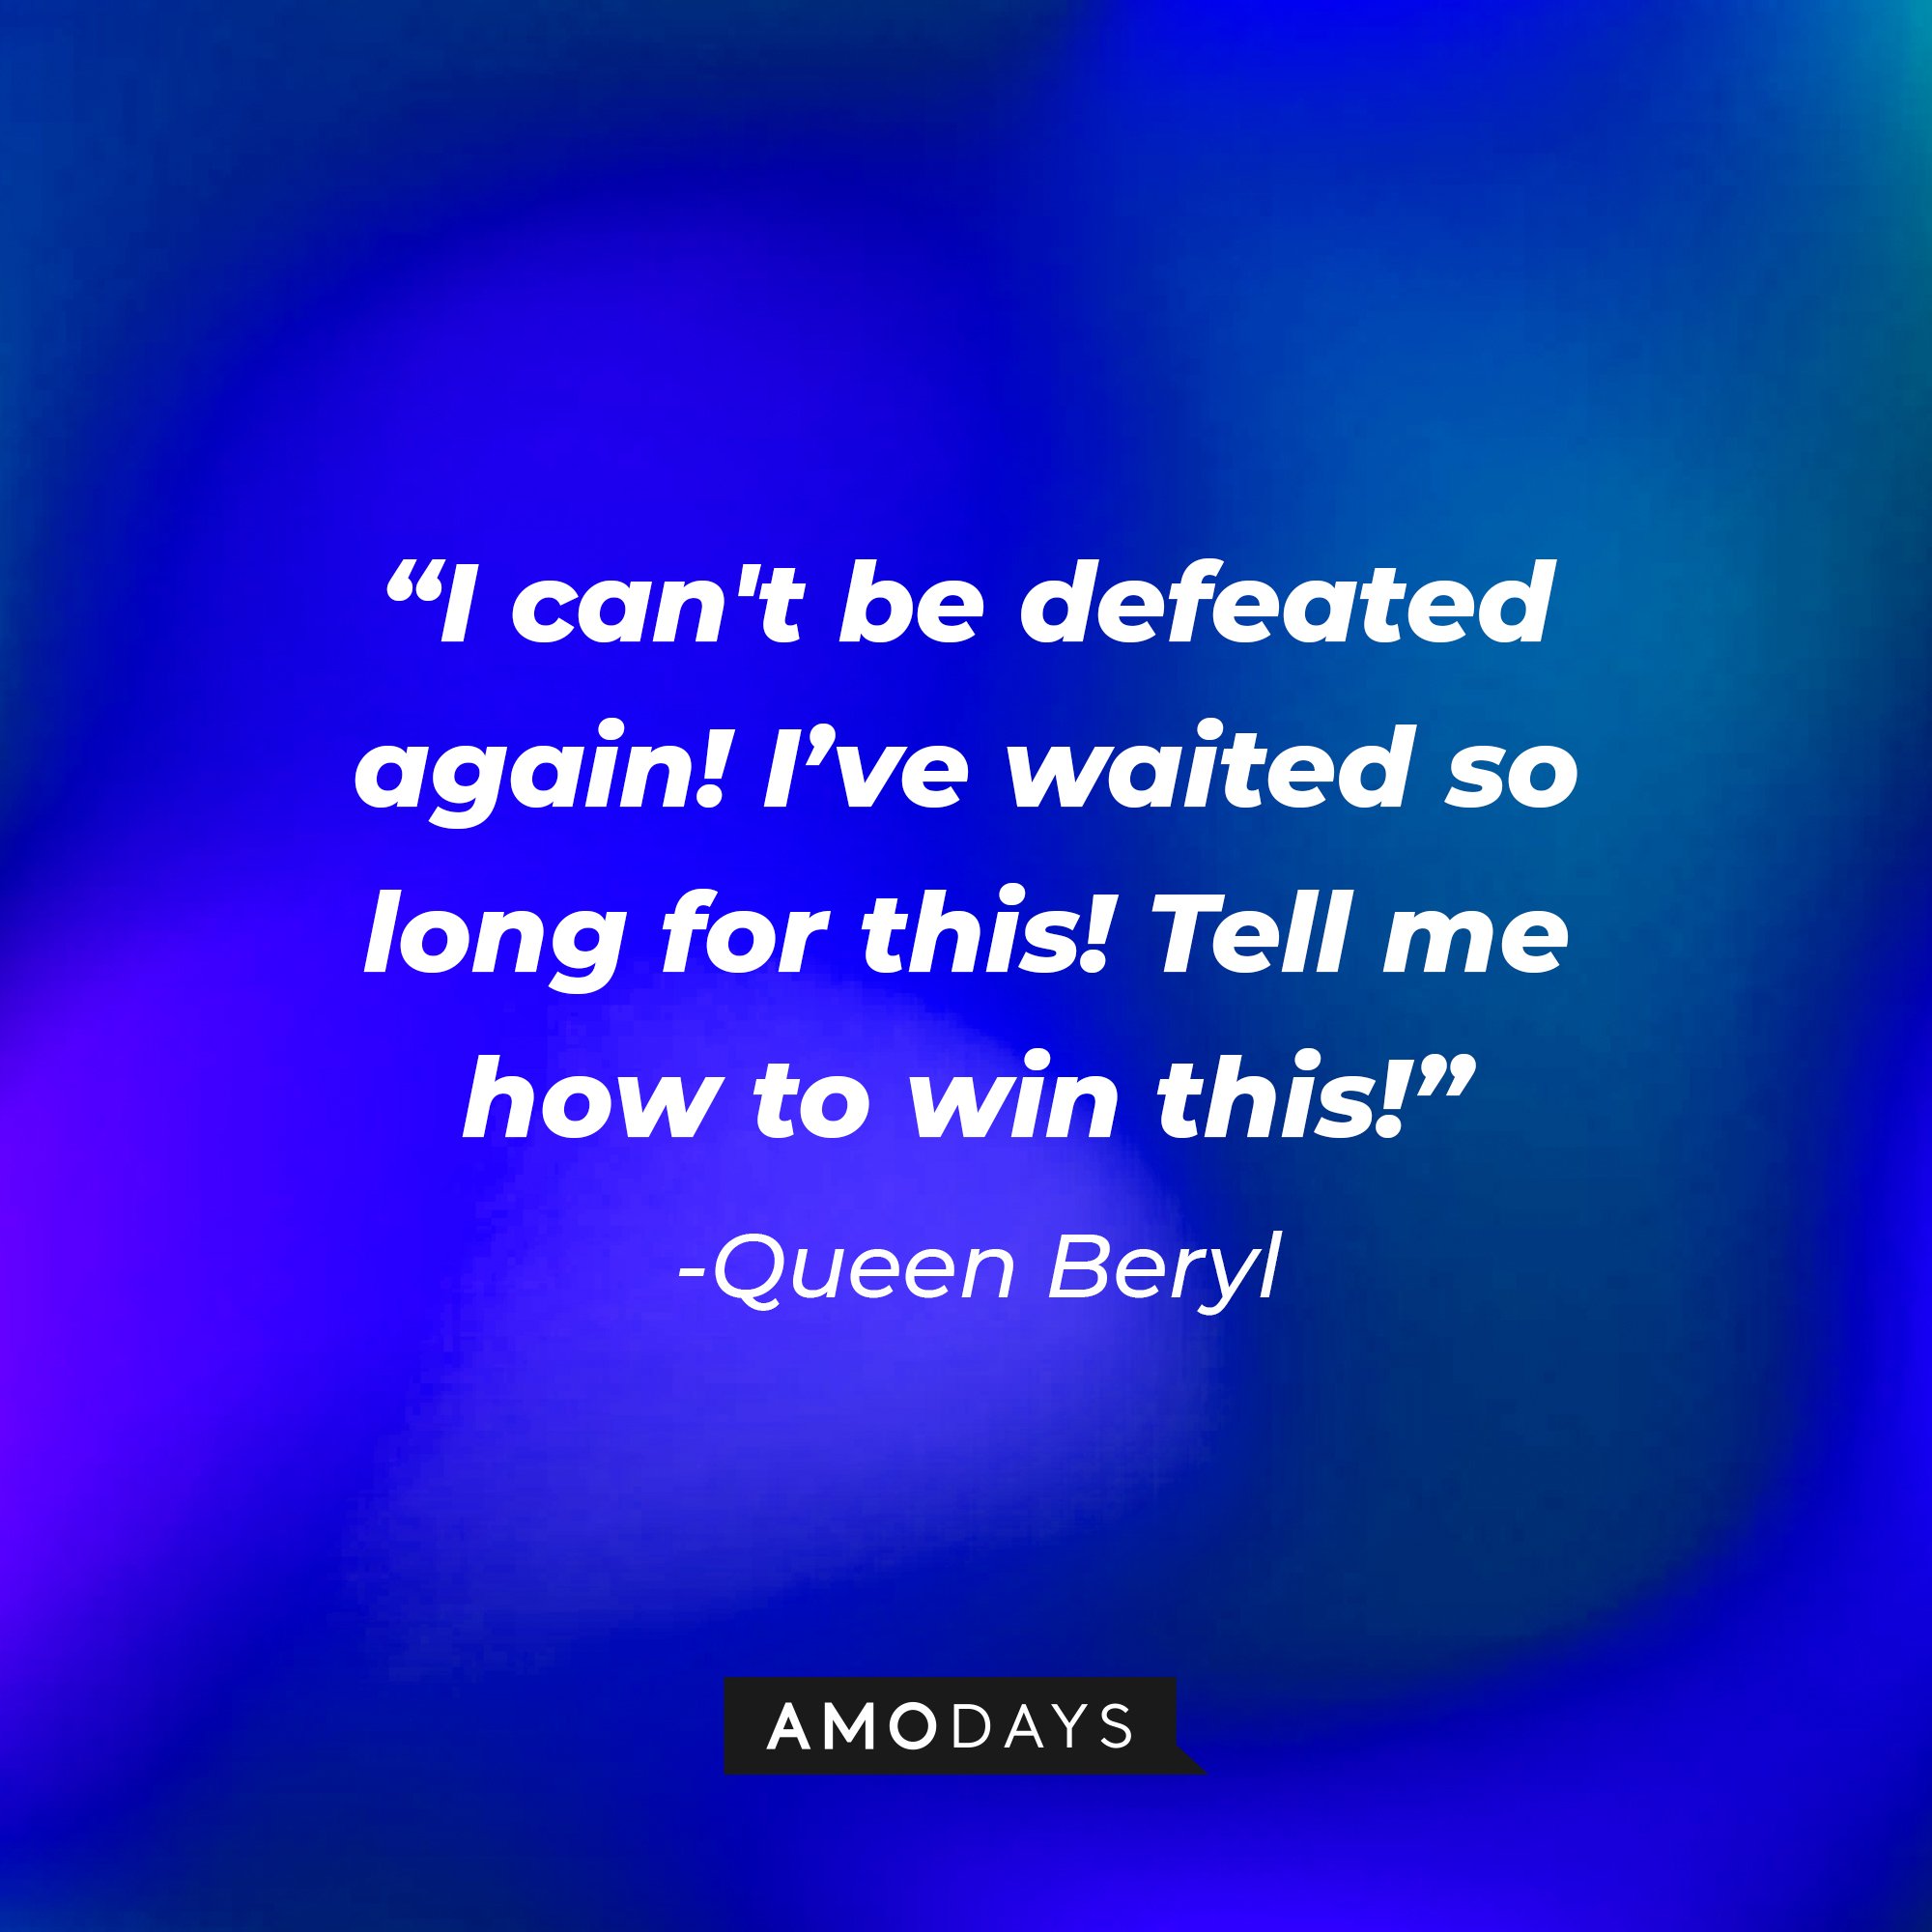 Queen Beryl: “I can't be defeated again! I've waited so long for this! Tell me how to win this!" | Image: AmoDays